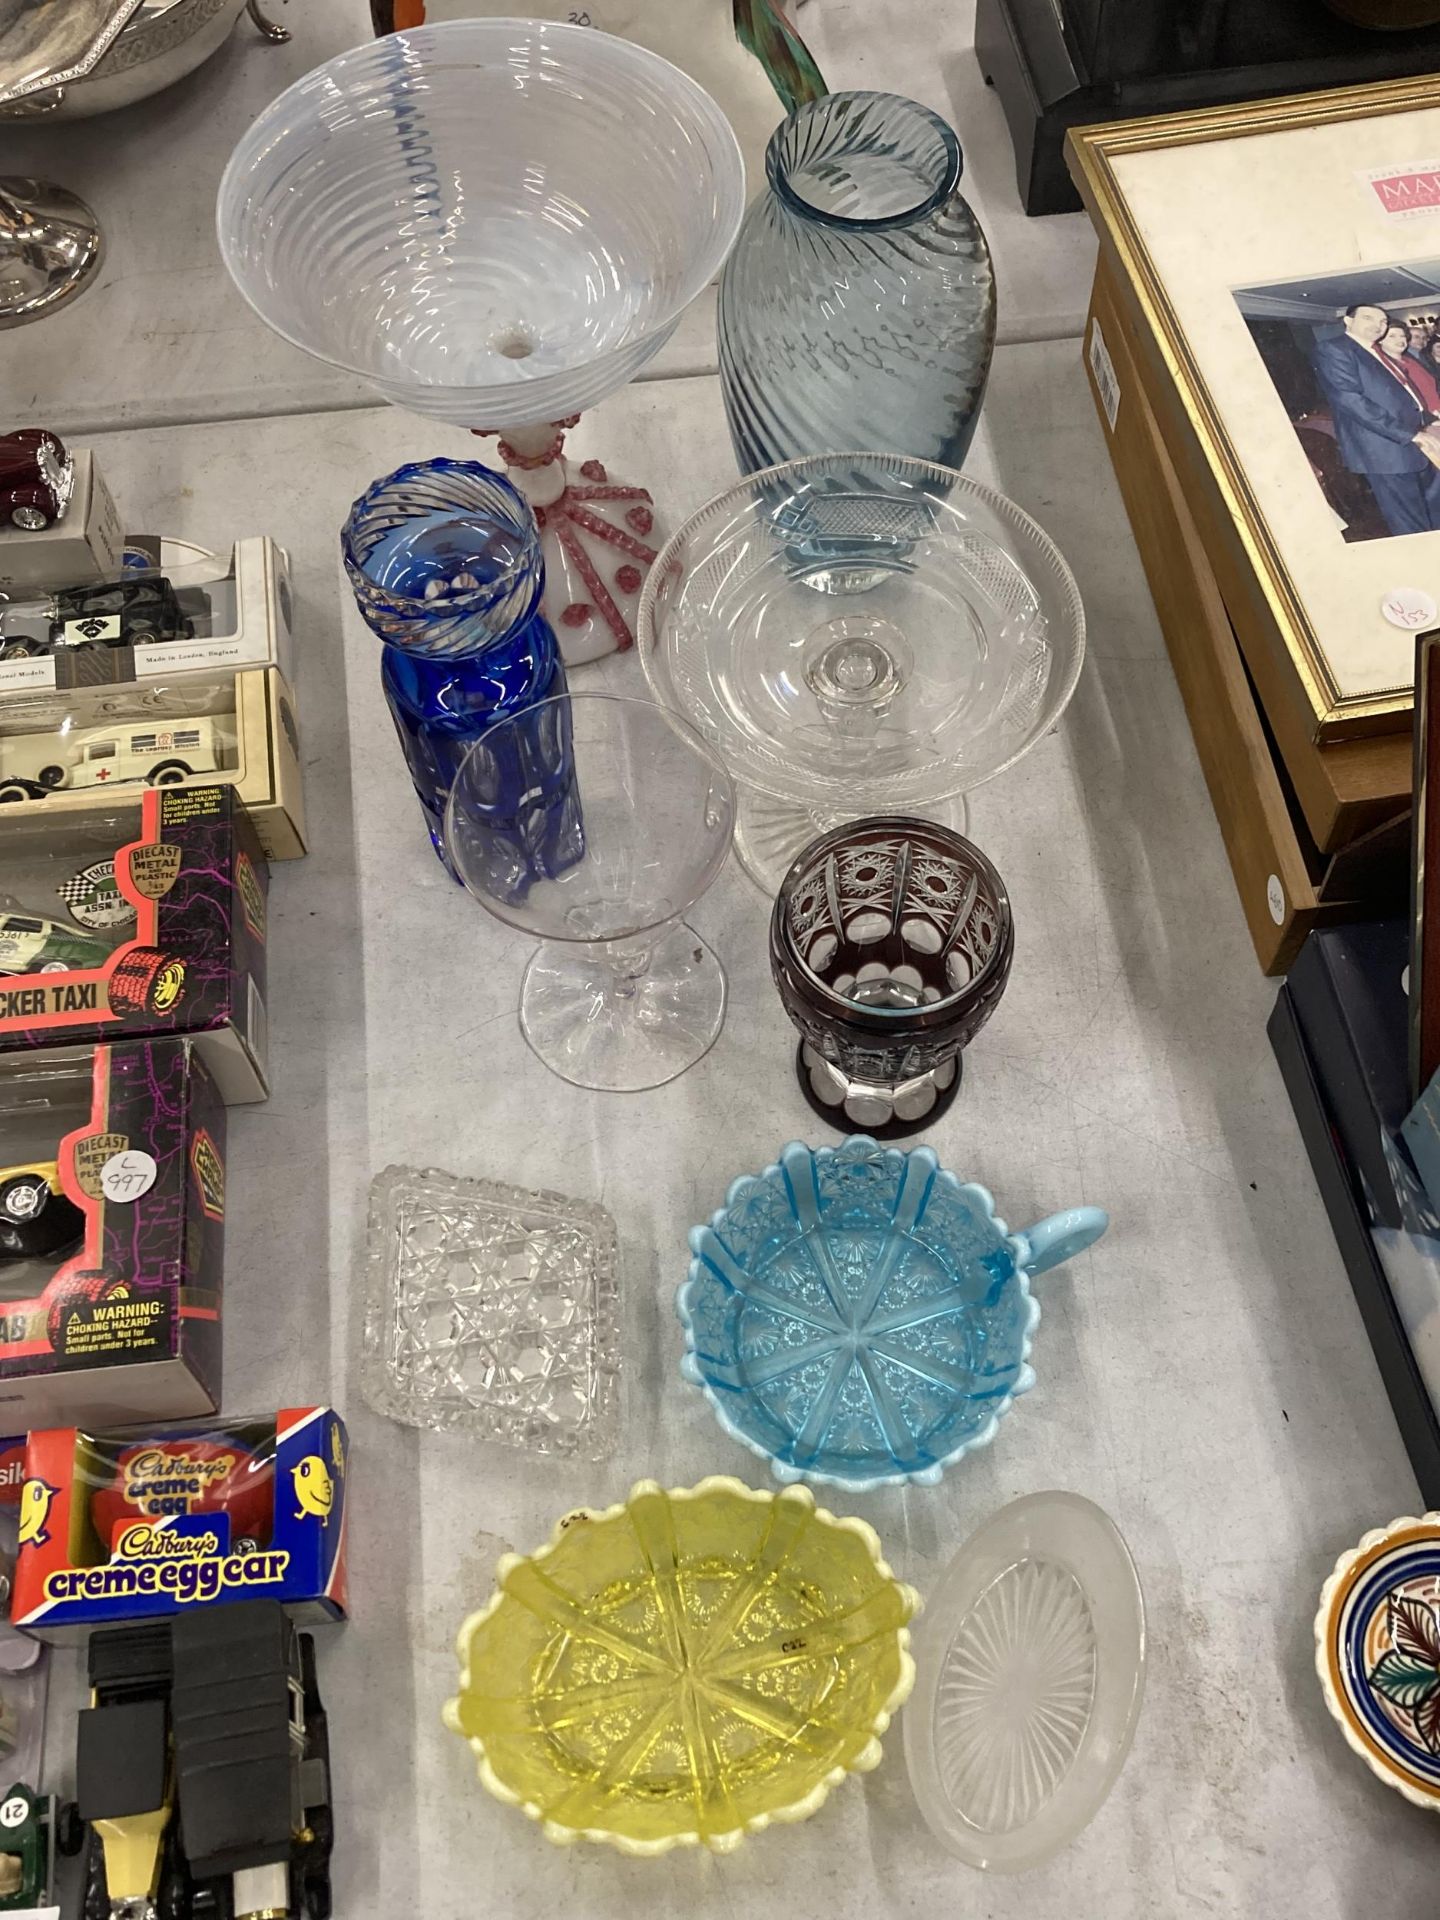 A QUANTITY OF GLASSWARE TO INCLUDE A TAZA DISH, VASES, BOWLS, GLASSES, ETC